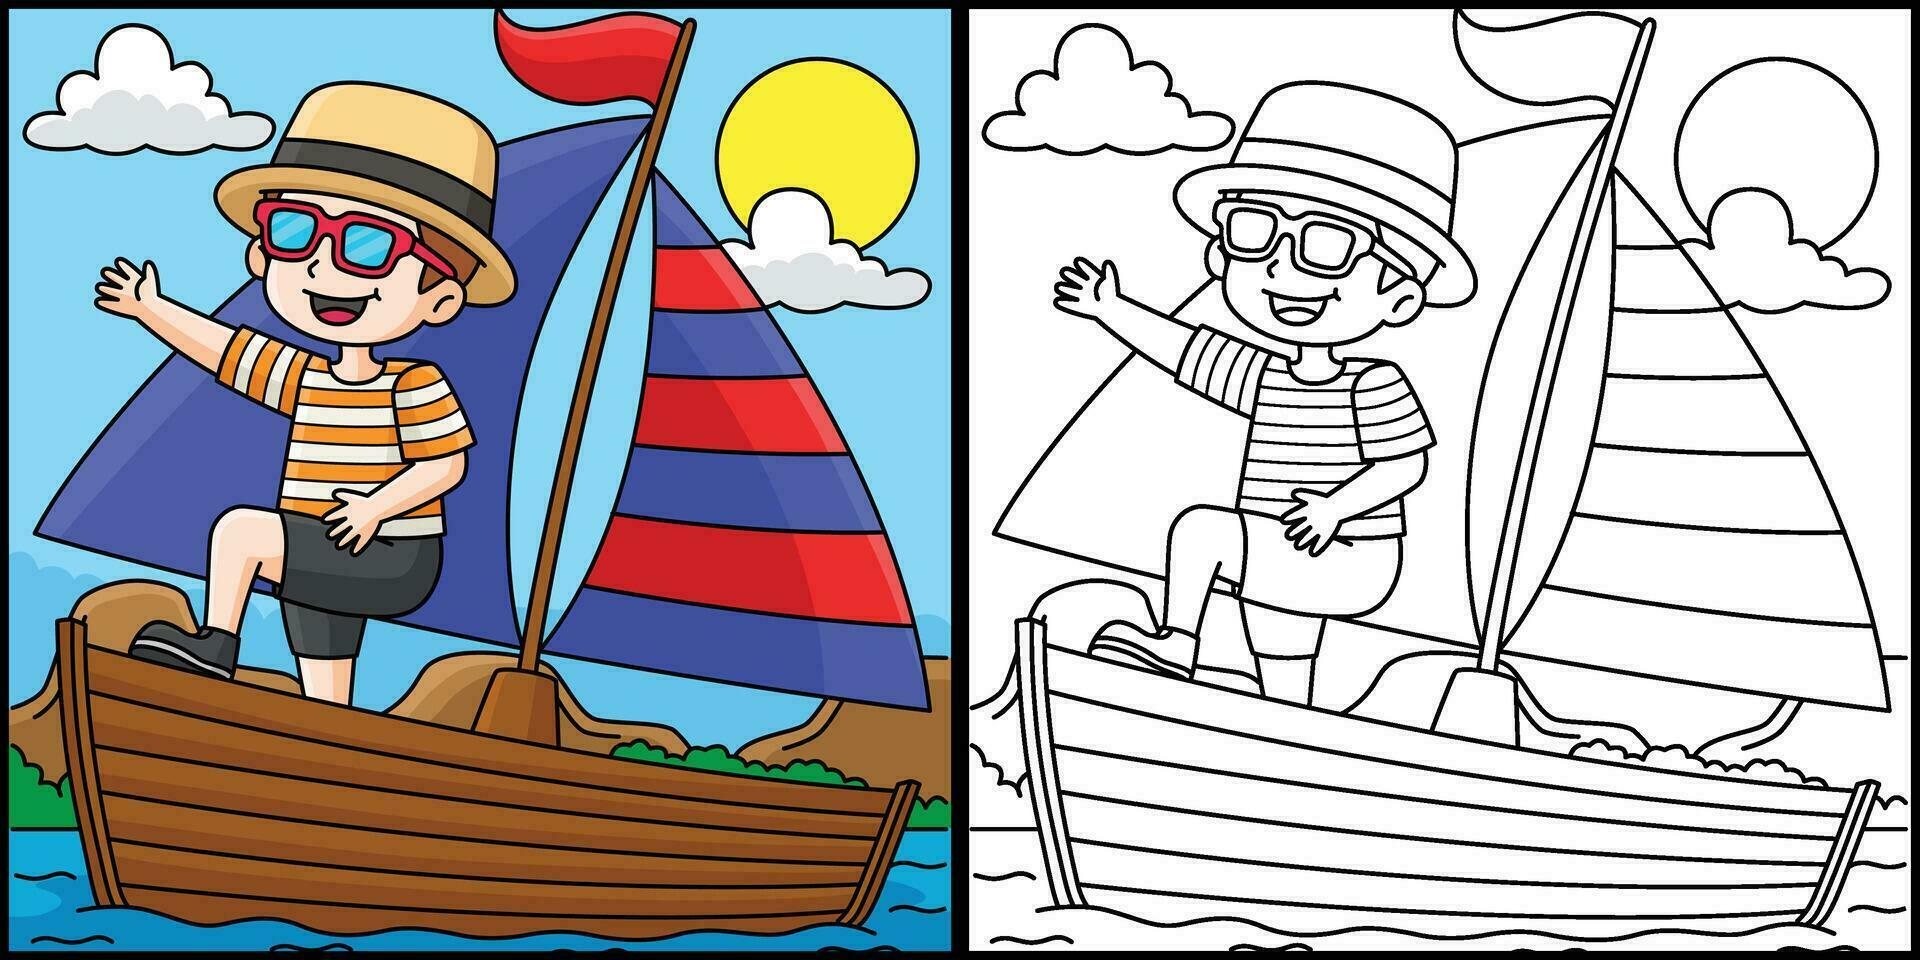 Boy on the Boat Summer Coloring Page Illustration vector